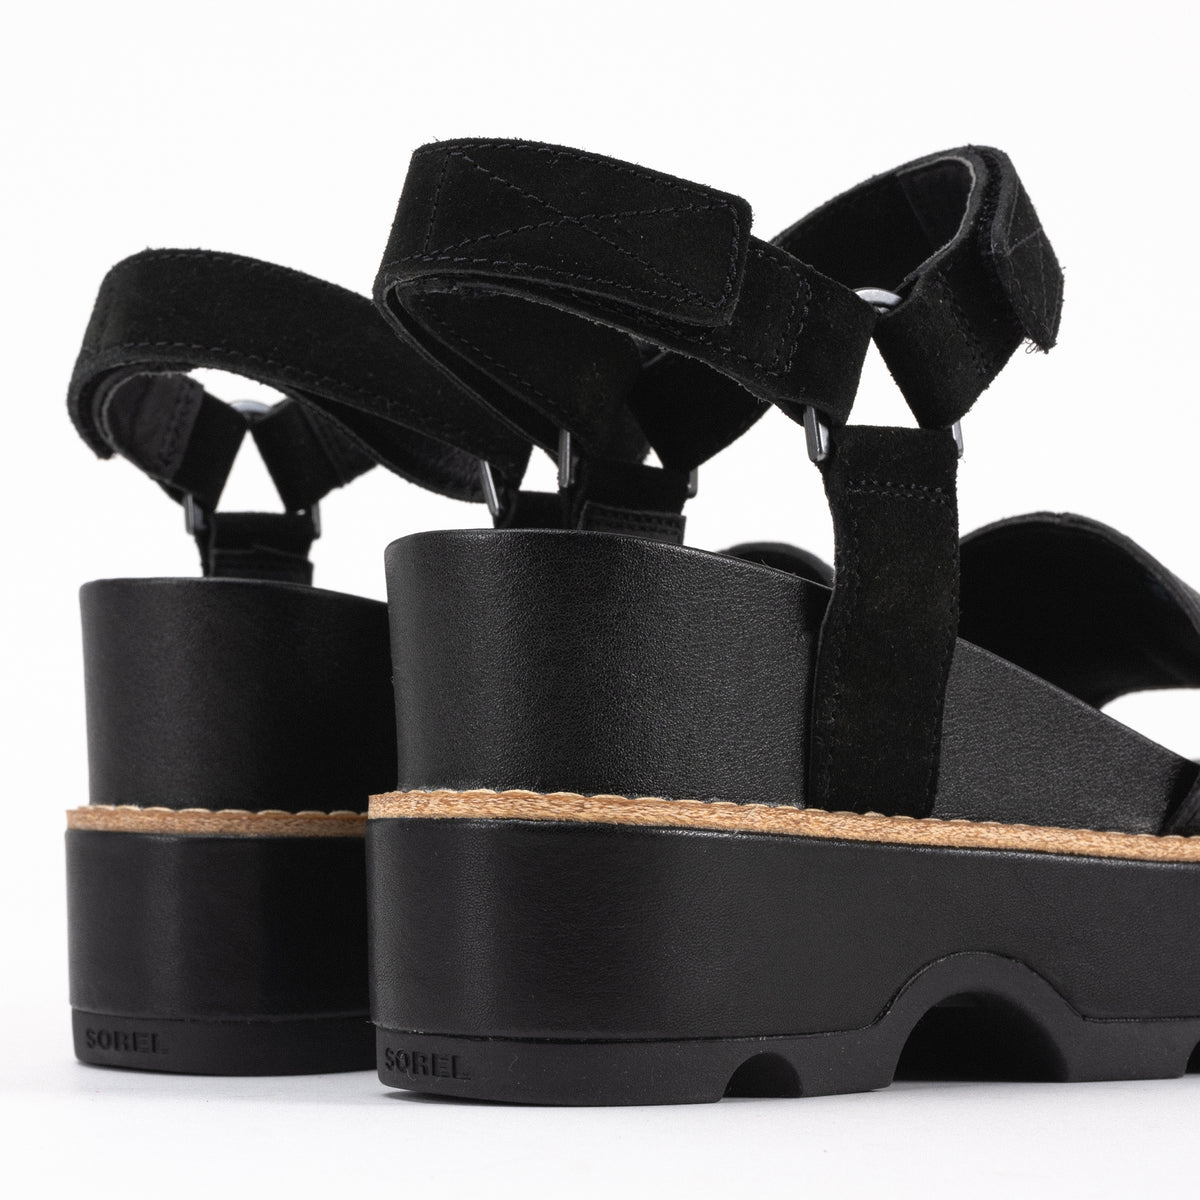 JOANIE IV ANKLE - BLACK - LEATHER/SUEDE